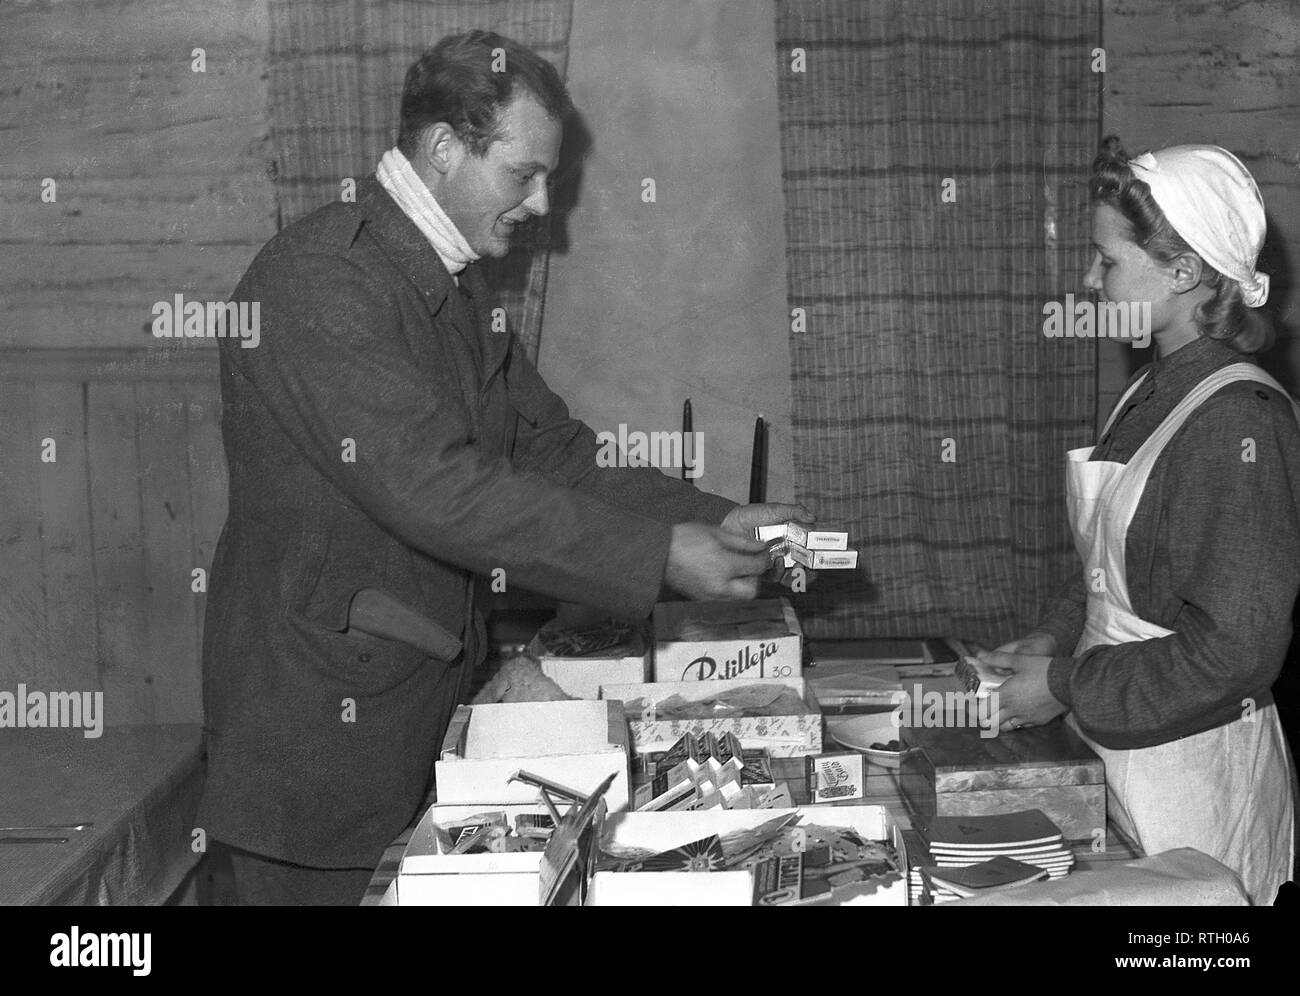 The Winter War. A military conflict between the Soviet union and Finland. It began with a Soviet invasion on november 1939 when Soviet infantery crossed the border on the Karelian Isthmus. About 9500 Swedish volunteer soldiers participated in the war.  Pictured Swedish volunteer soldier buying cigarettes from the young Finnish girl Anna-Lena Juula in a temporary store. January 1940. Photo Kristoffersson ref 103-20. Stock Photo